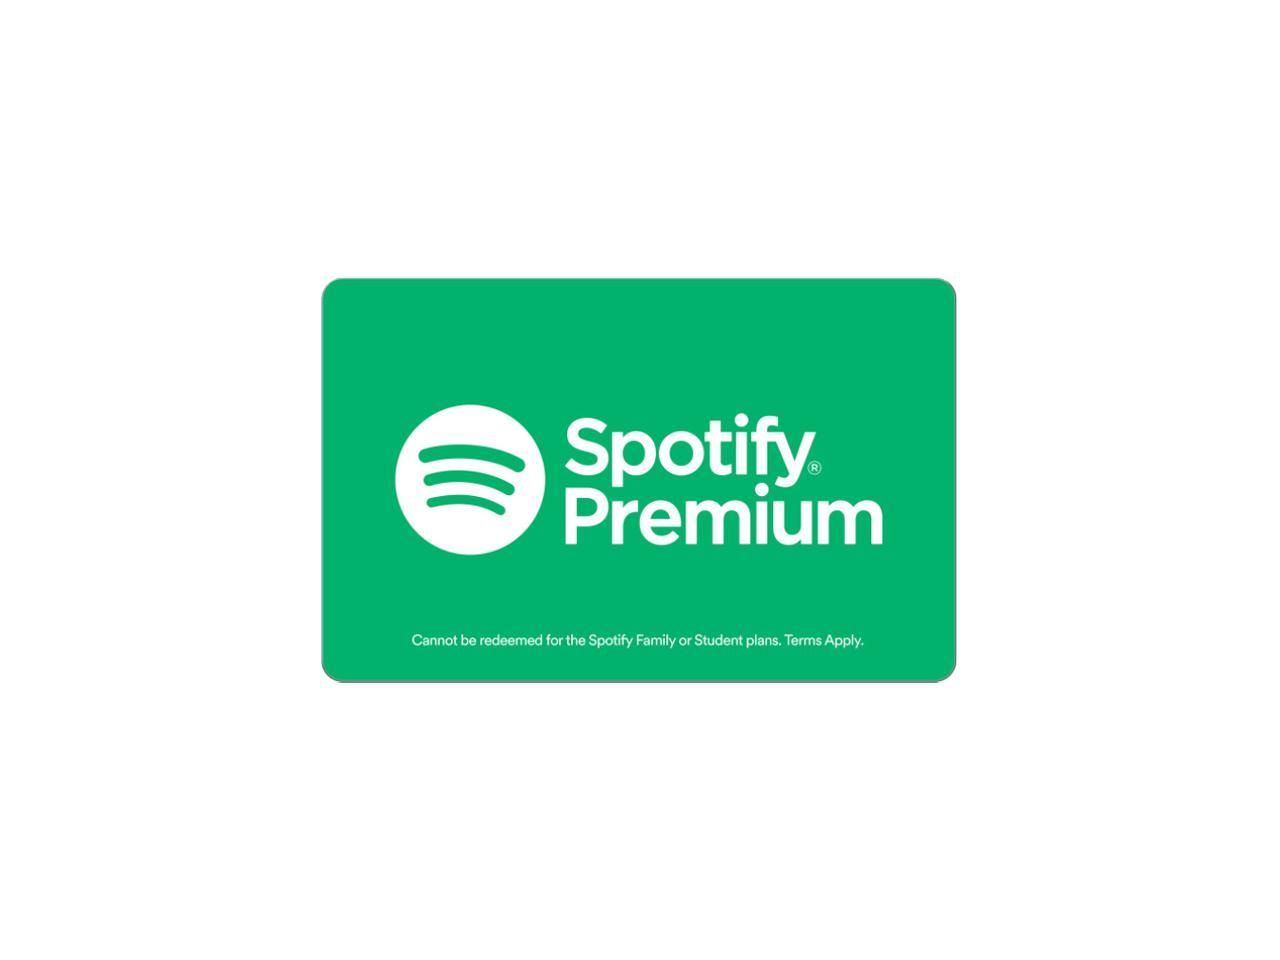 spotify gift card 10